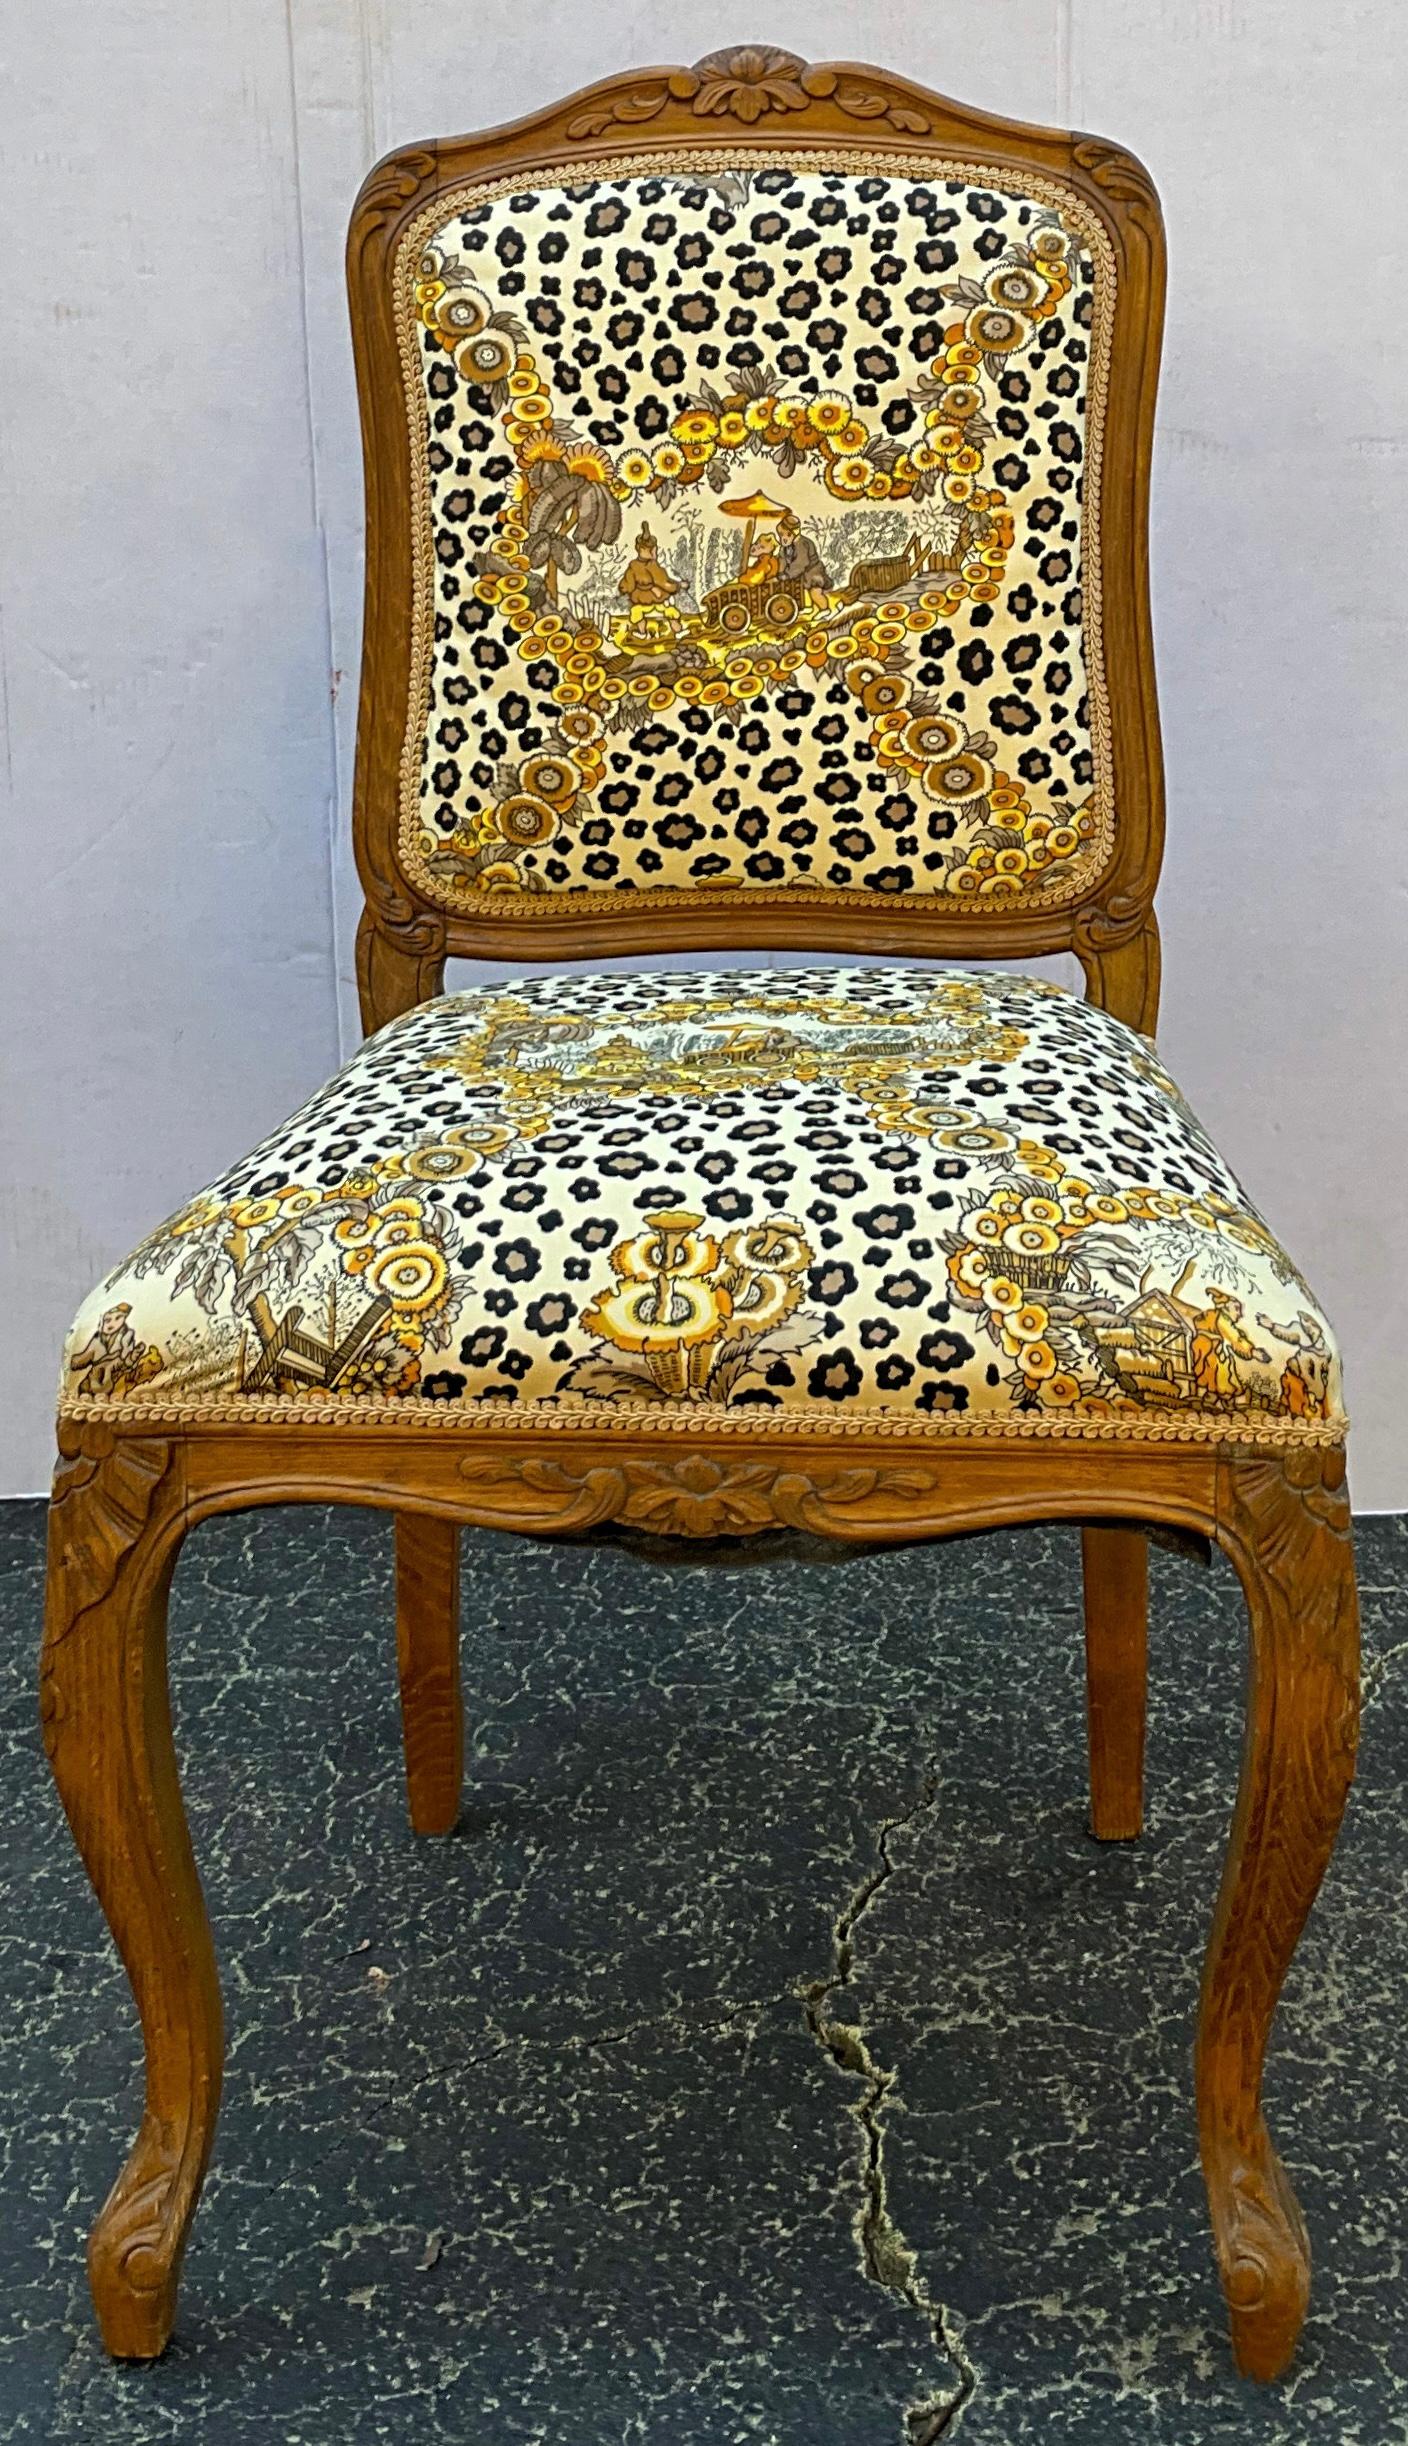 20th Century 1950s French Carved Oak Chair in Brunschwig & Fils Chinoiserie Leopard Fabric For Sale